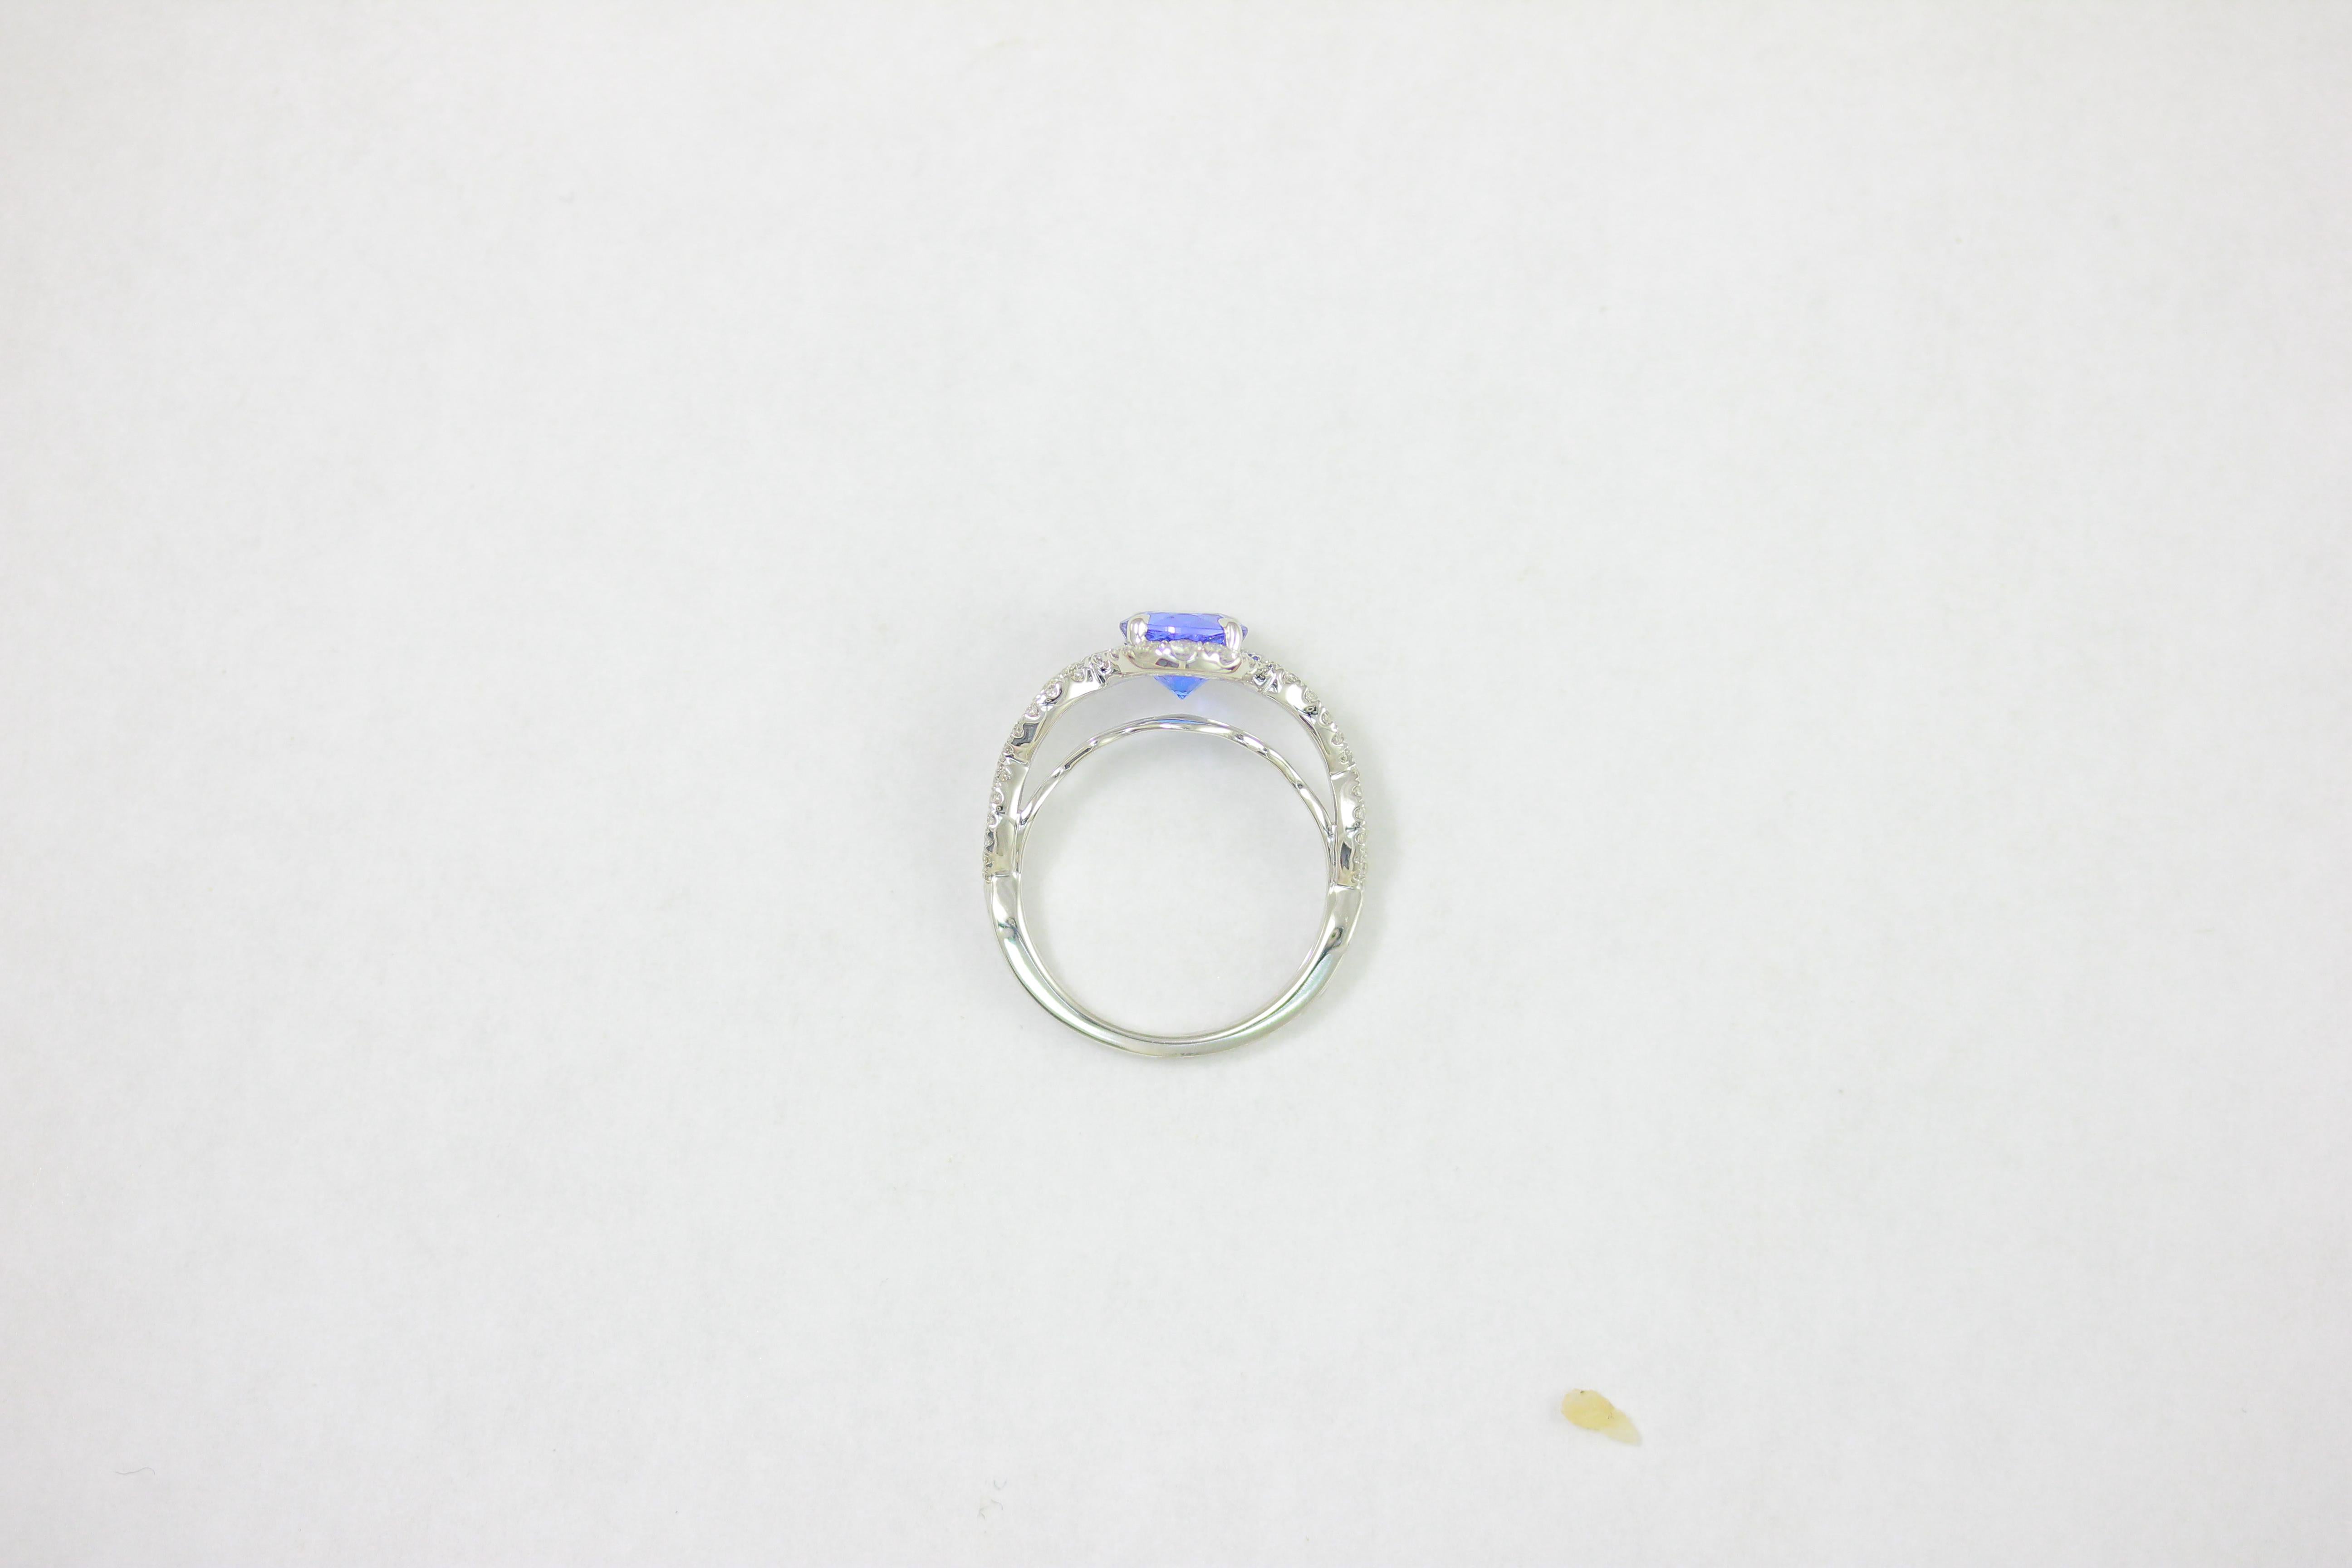 Contemporary Frederic Sage 1.64 Carat Tanzanite White Diamond Engagement Bridal Cocktail Ring For Sale